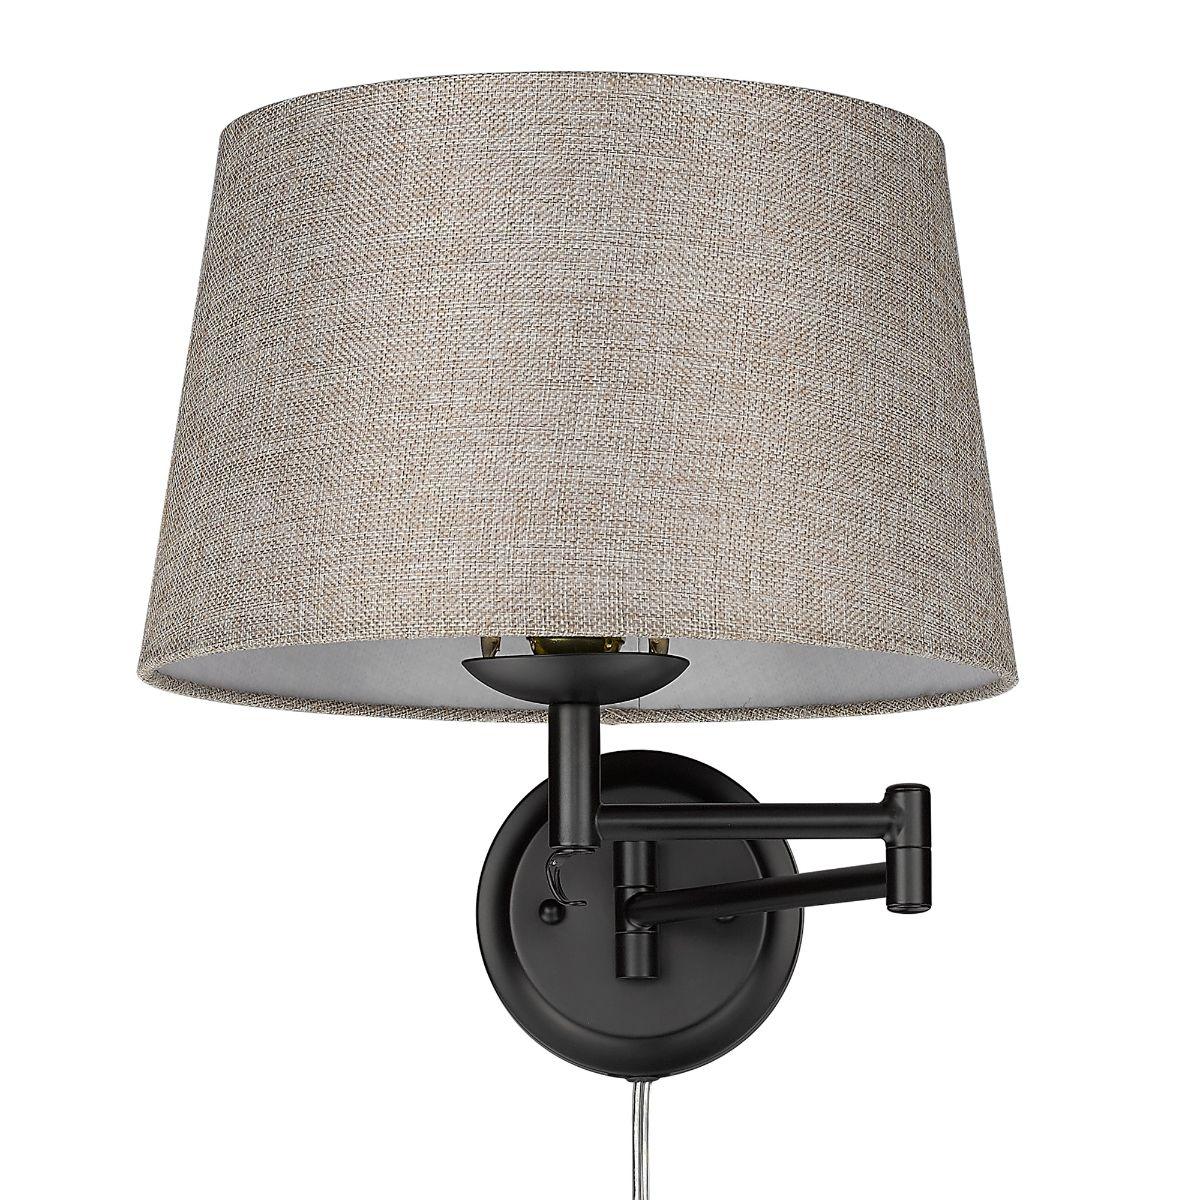 Eleanor 13 in. Wall Sconce Matte Black Finish with Natural Sisal Shade